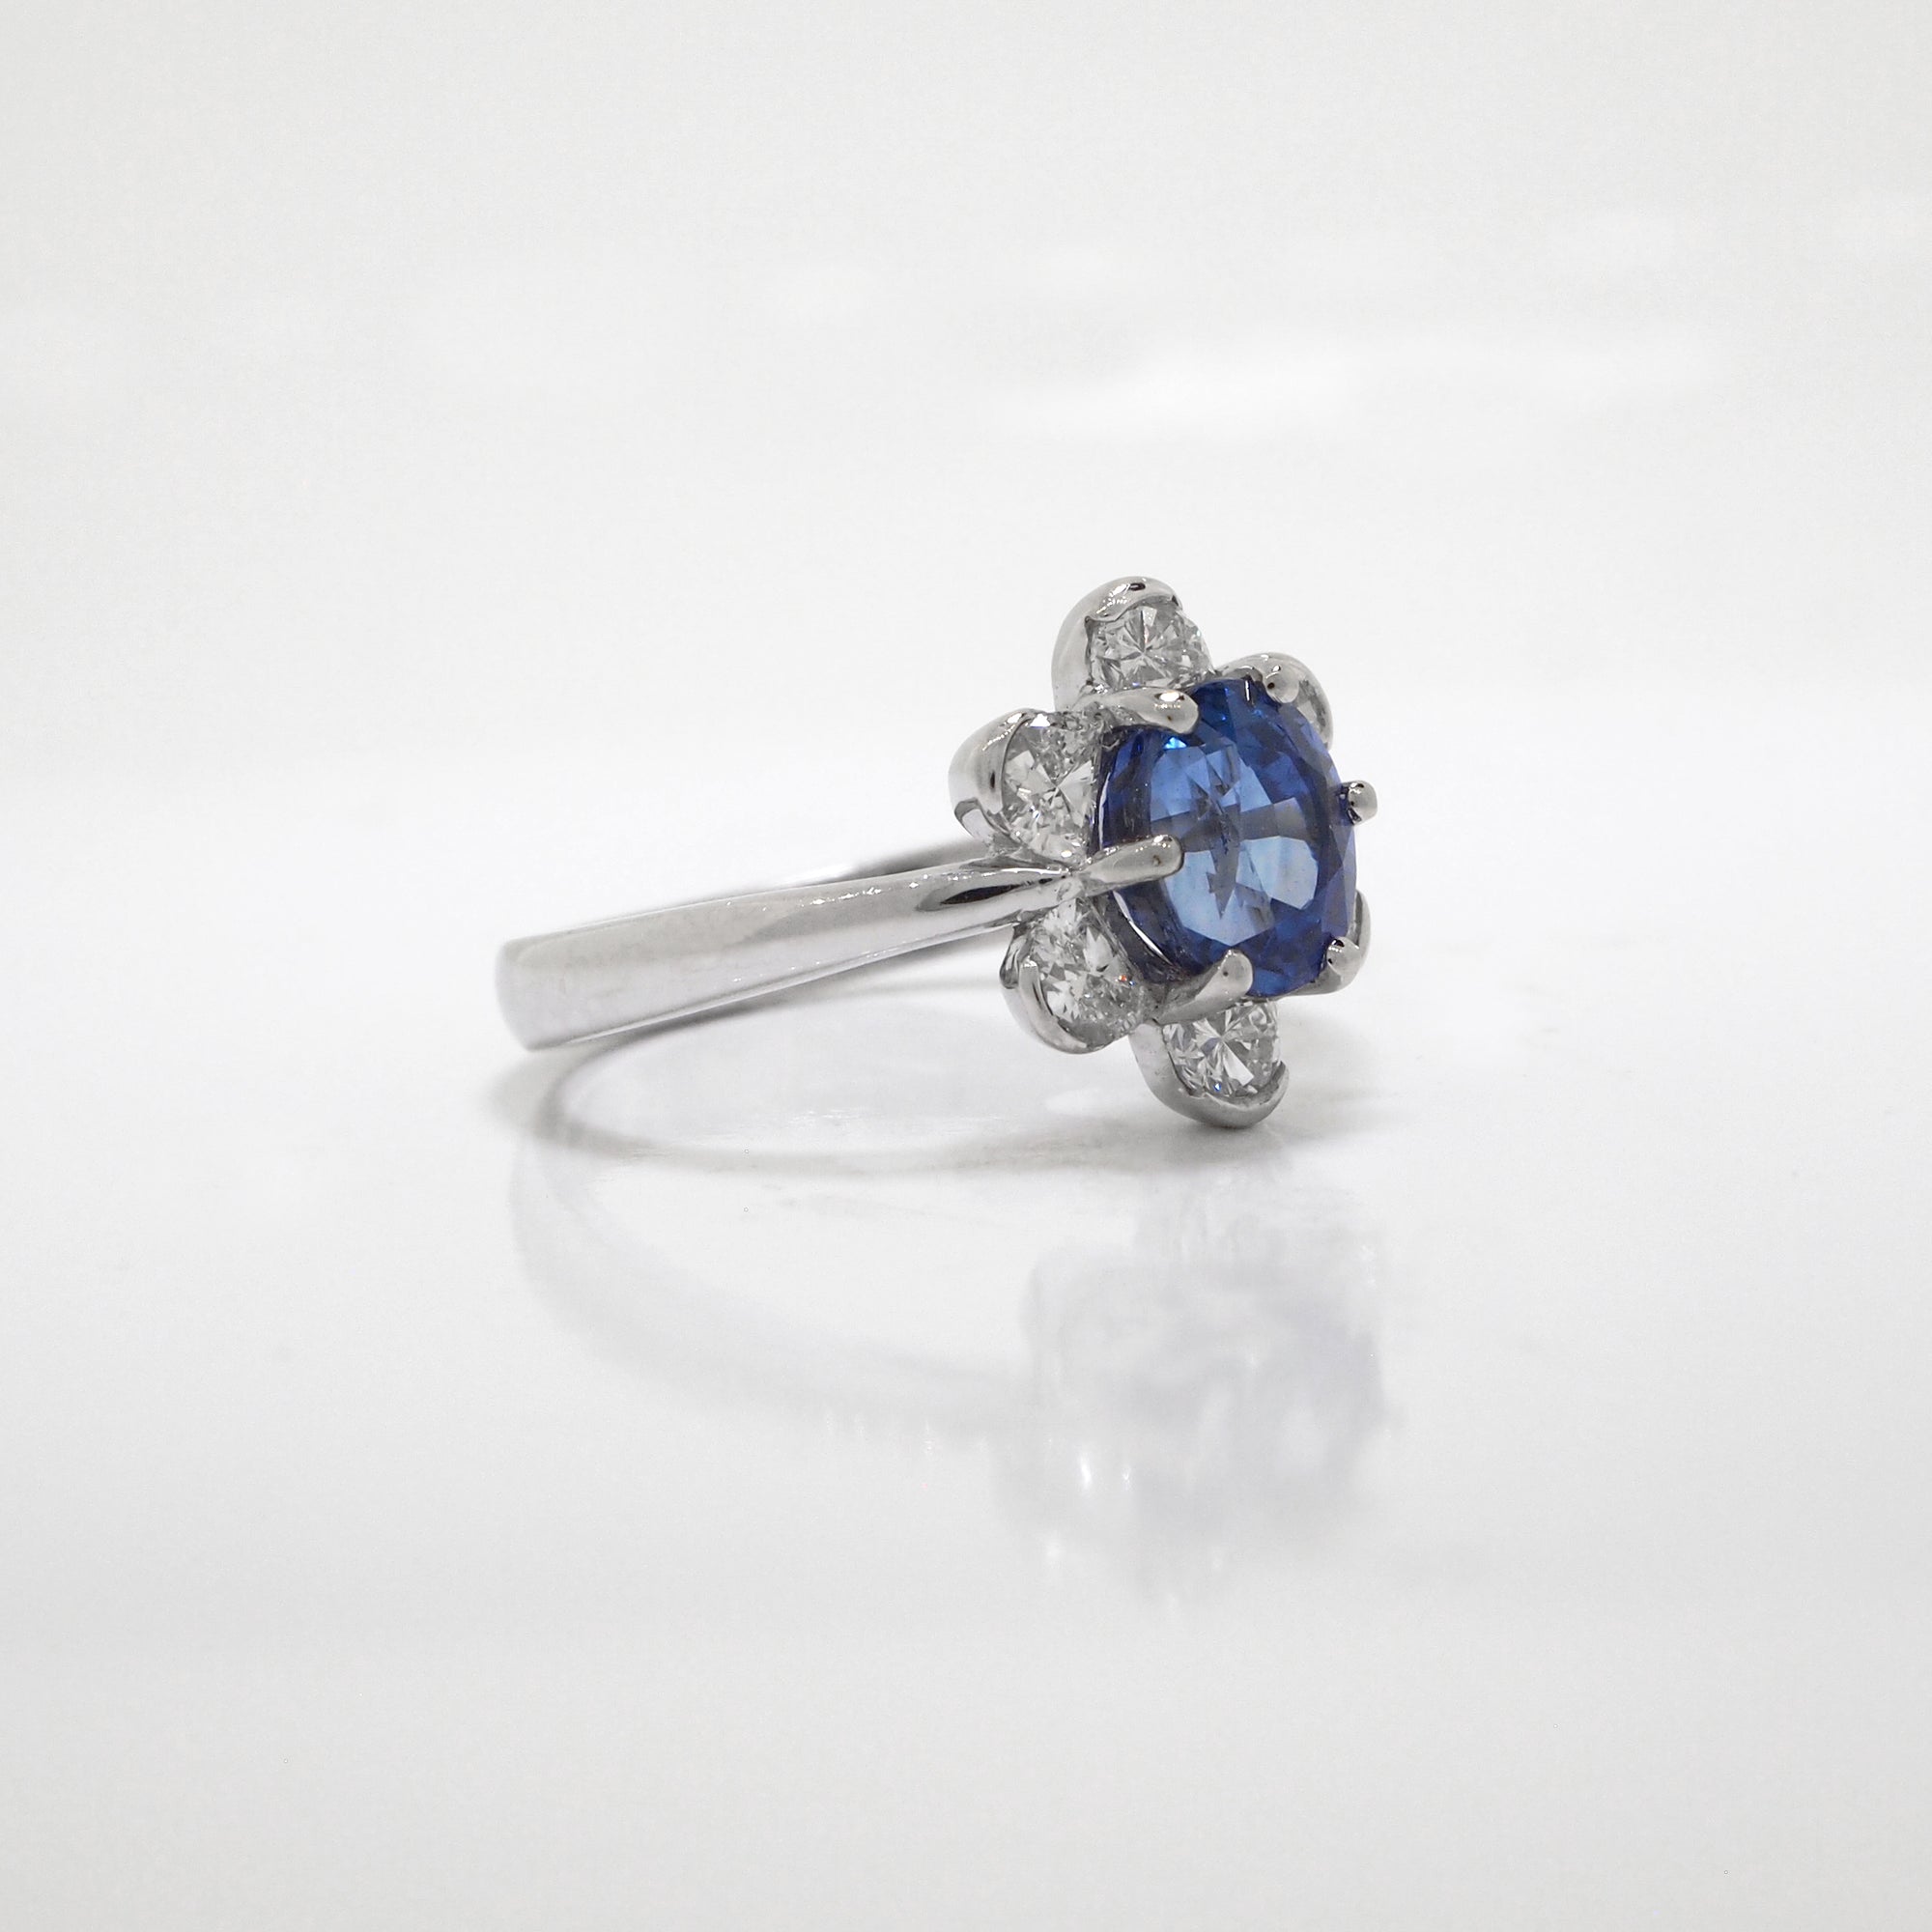 18K white gold sapphire and diamond ring featuring one 1.70 carat oval blue sapphire, and a 6 diamond halo with diamonds weighing a total of 0.56 carats.